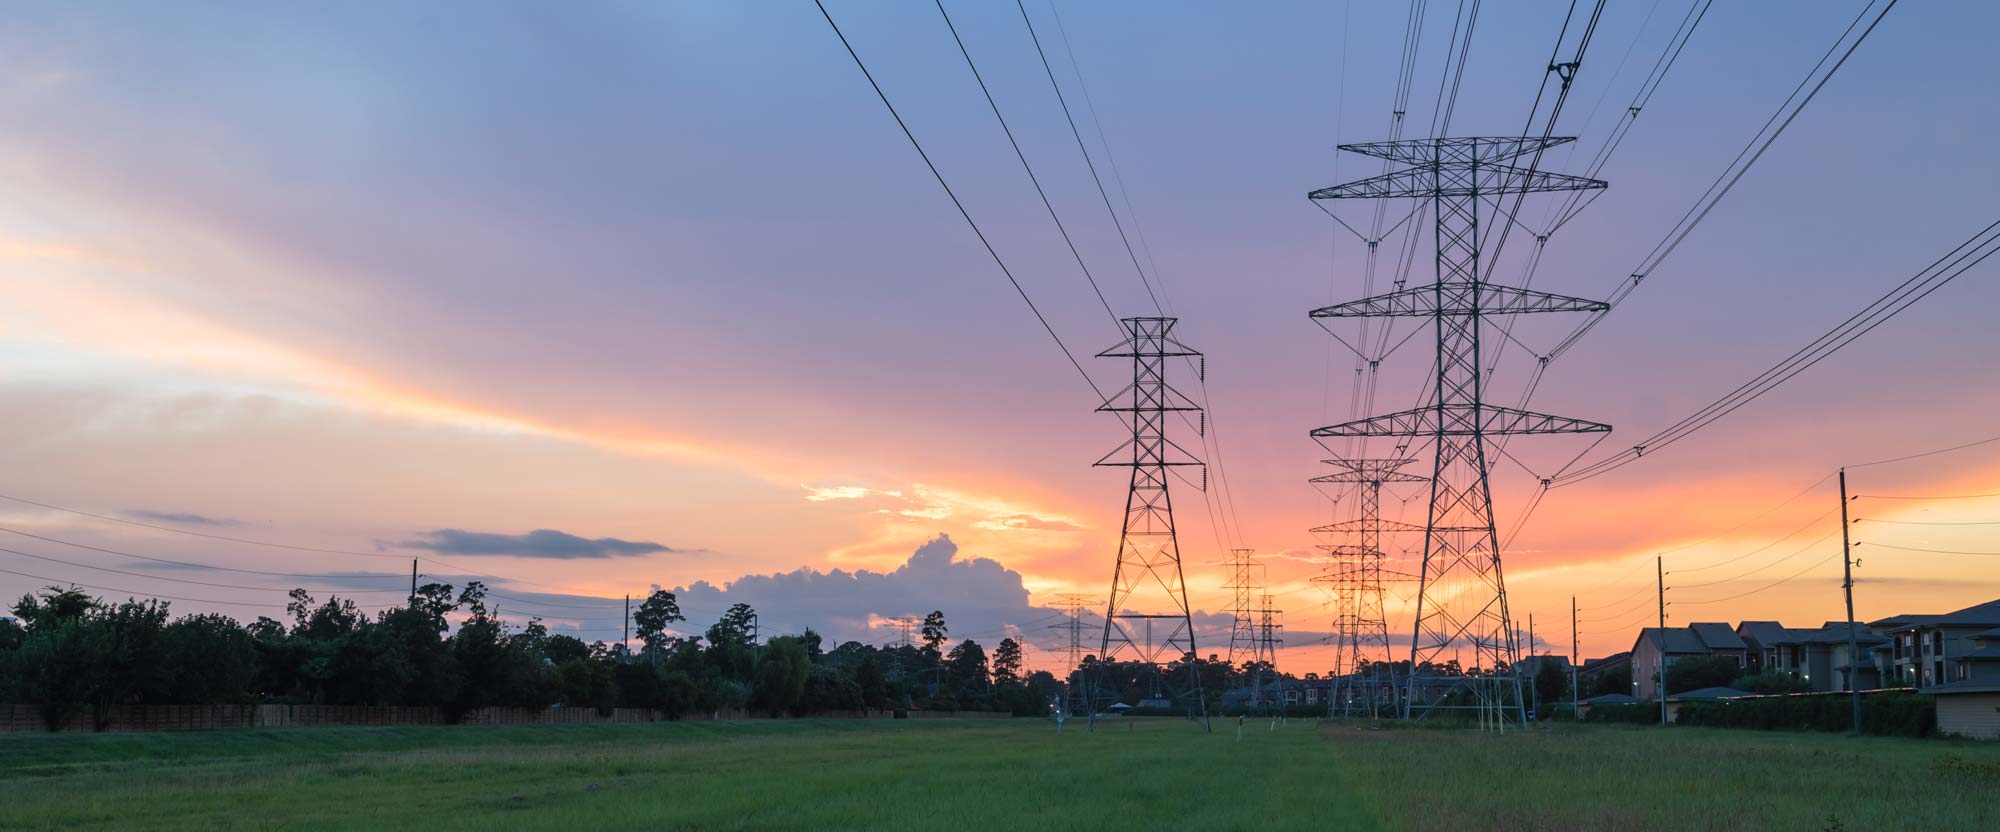 Power transmission lines at sunset near Midwest town